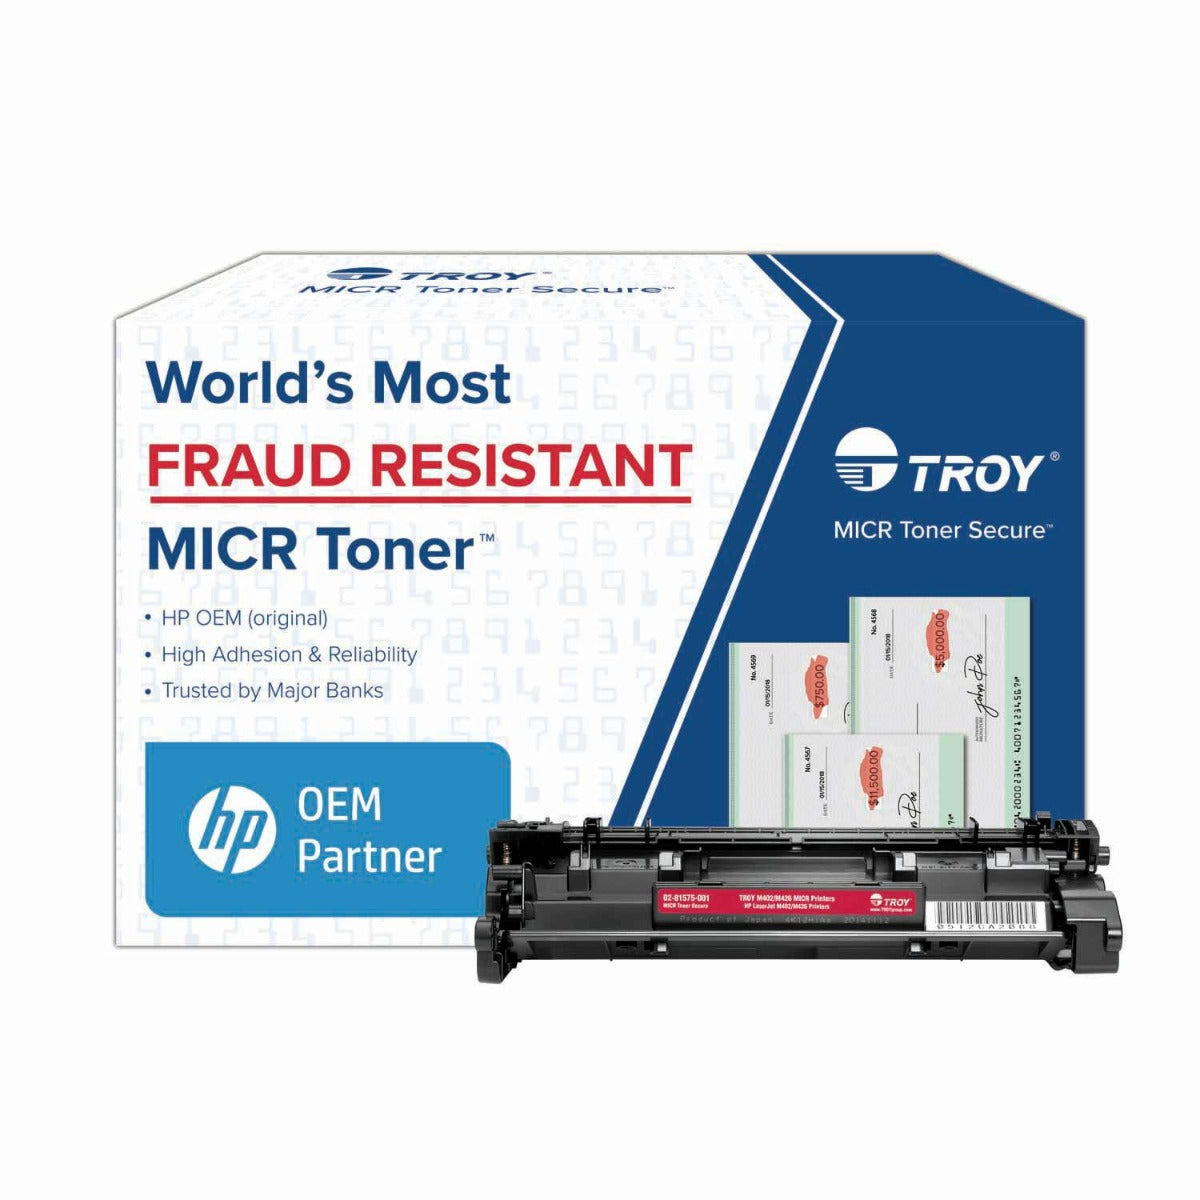 TROY M402/M426 MICR Toner Secure Standard Yield Cartridge (Coordinating HP Part Number: CF226A)